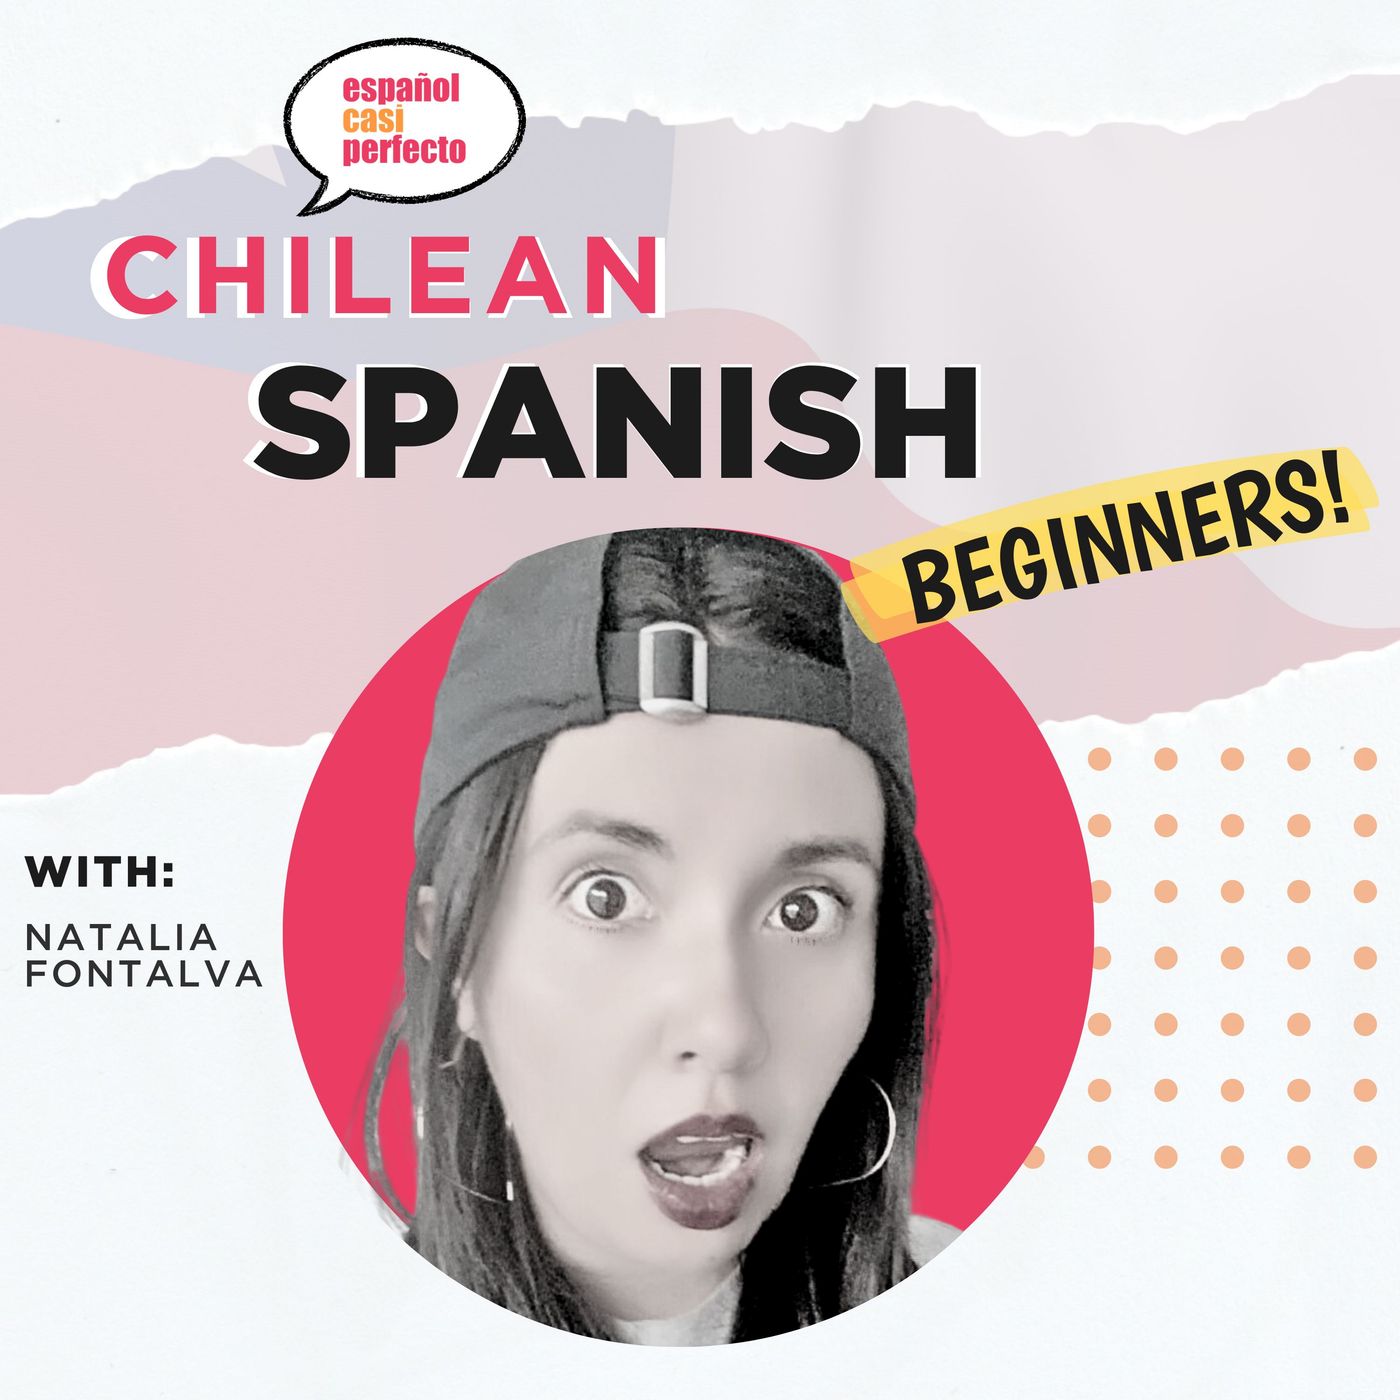 Why Chileans say "po"?